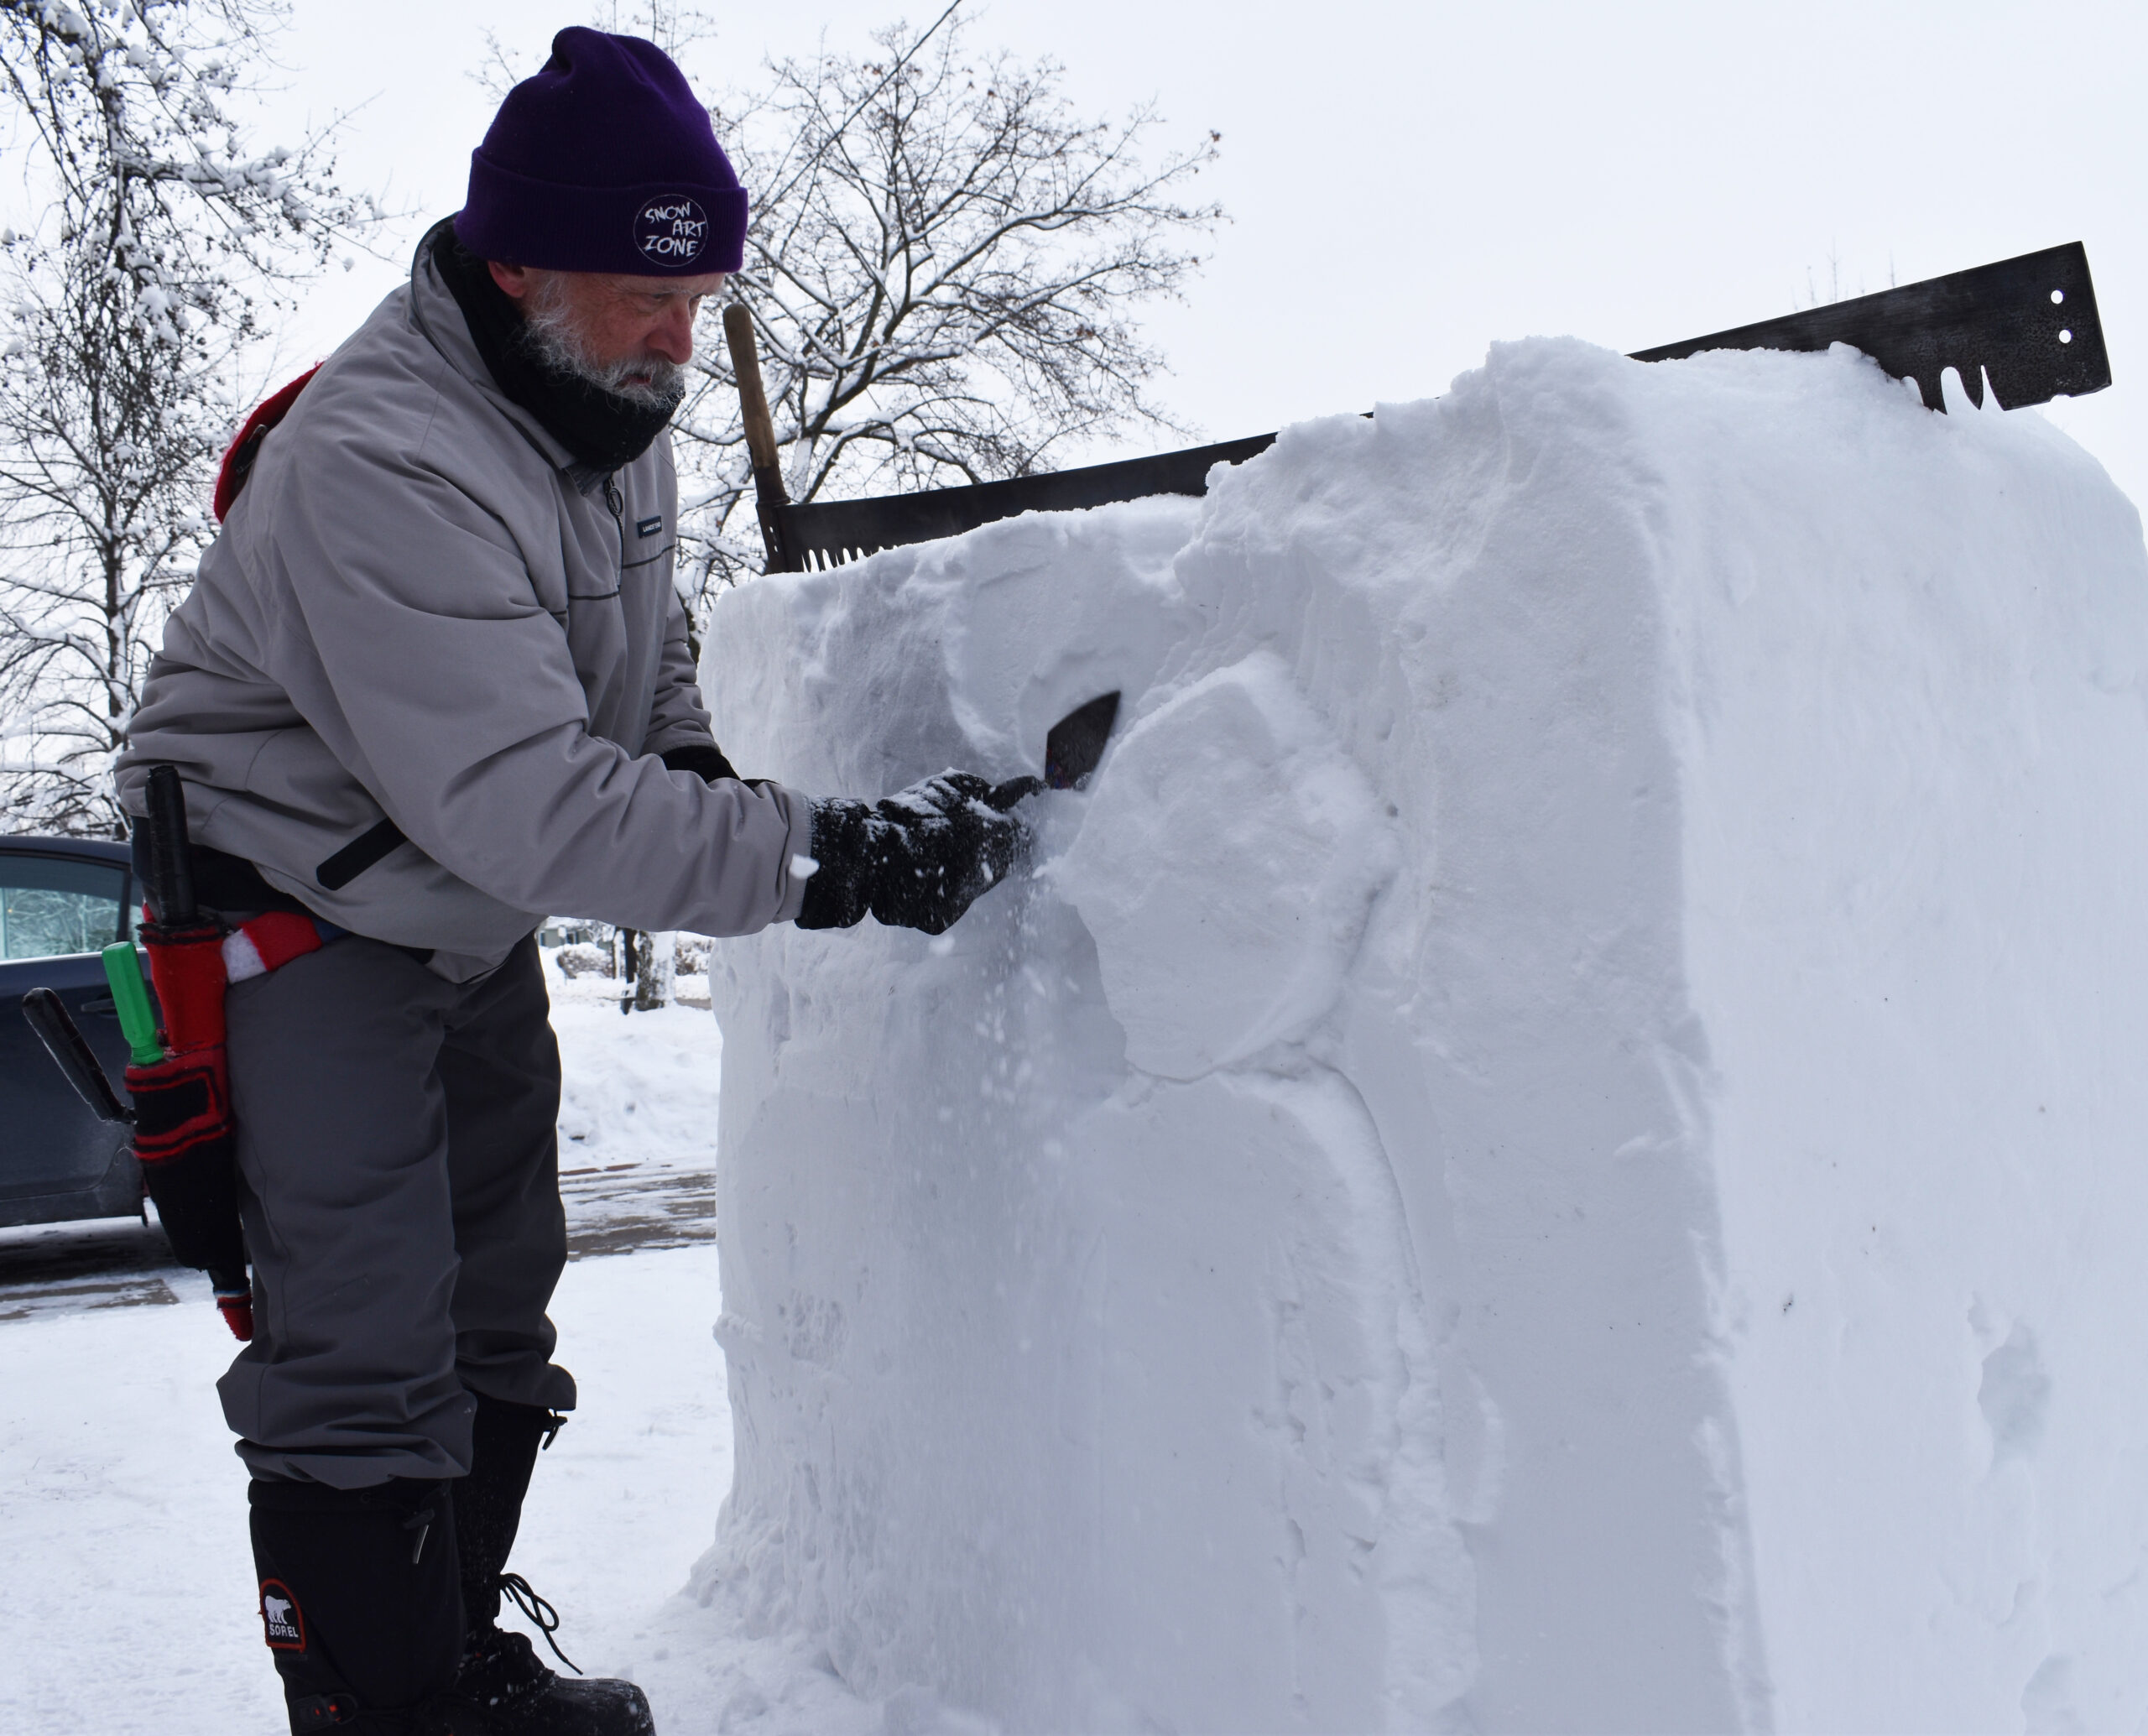 Snow sculptor Jef Schobert works with a trowel on one of his carvings in his front yard in Stevens Point.